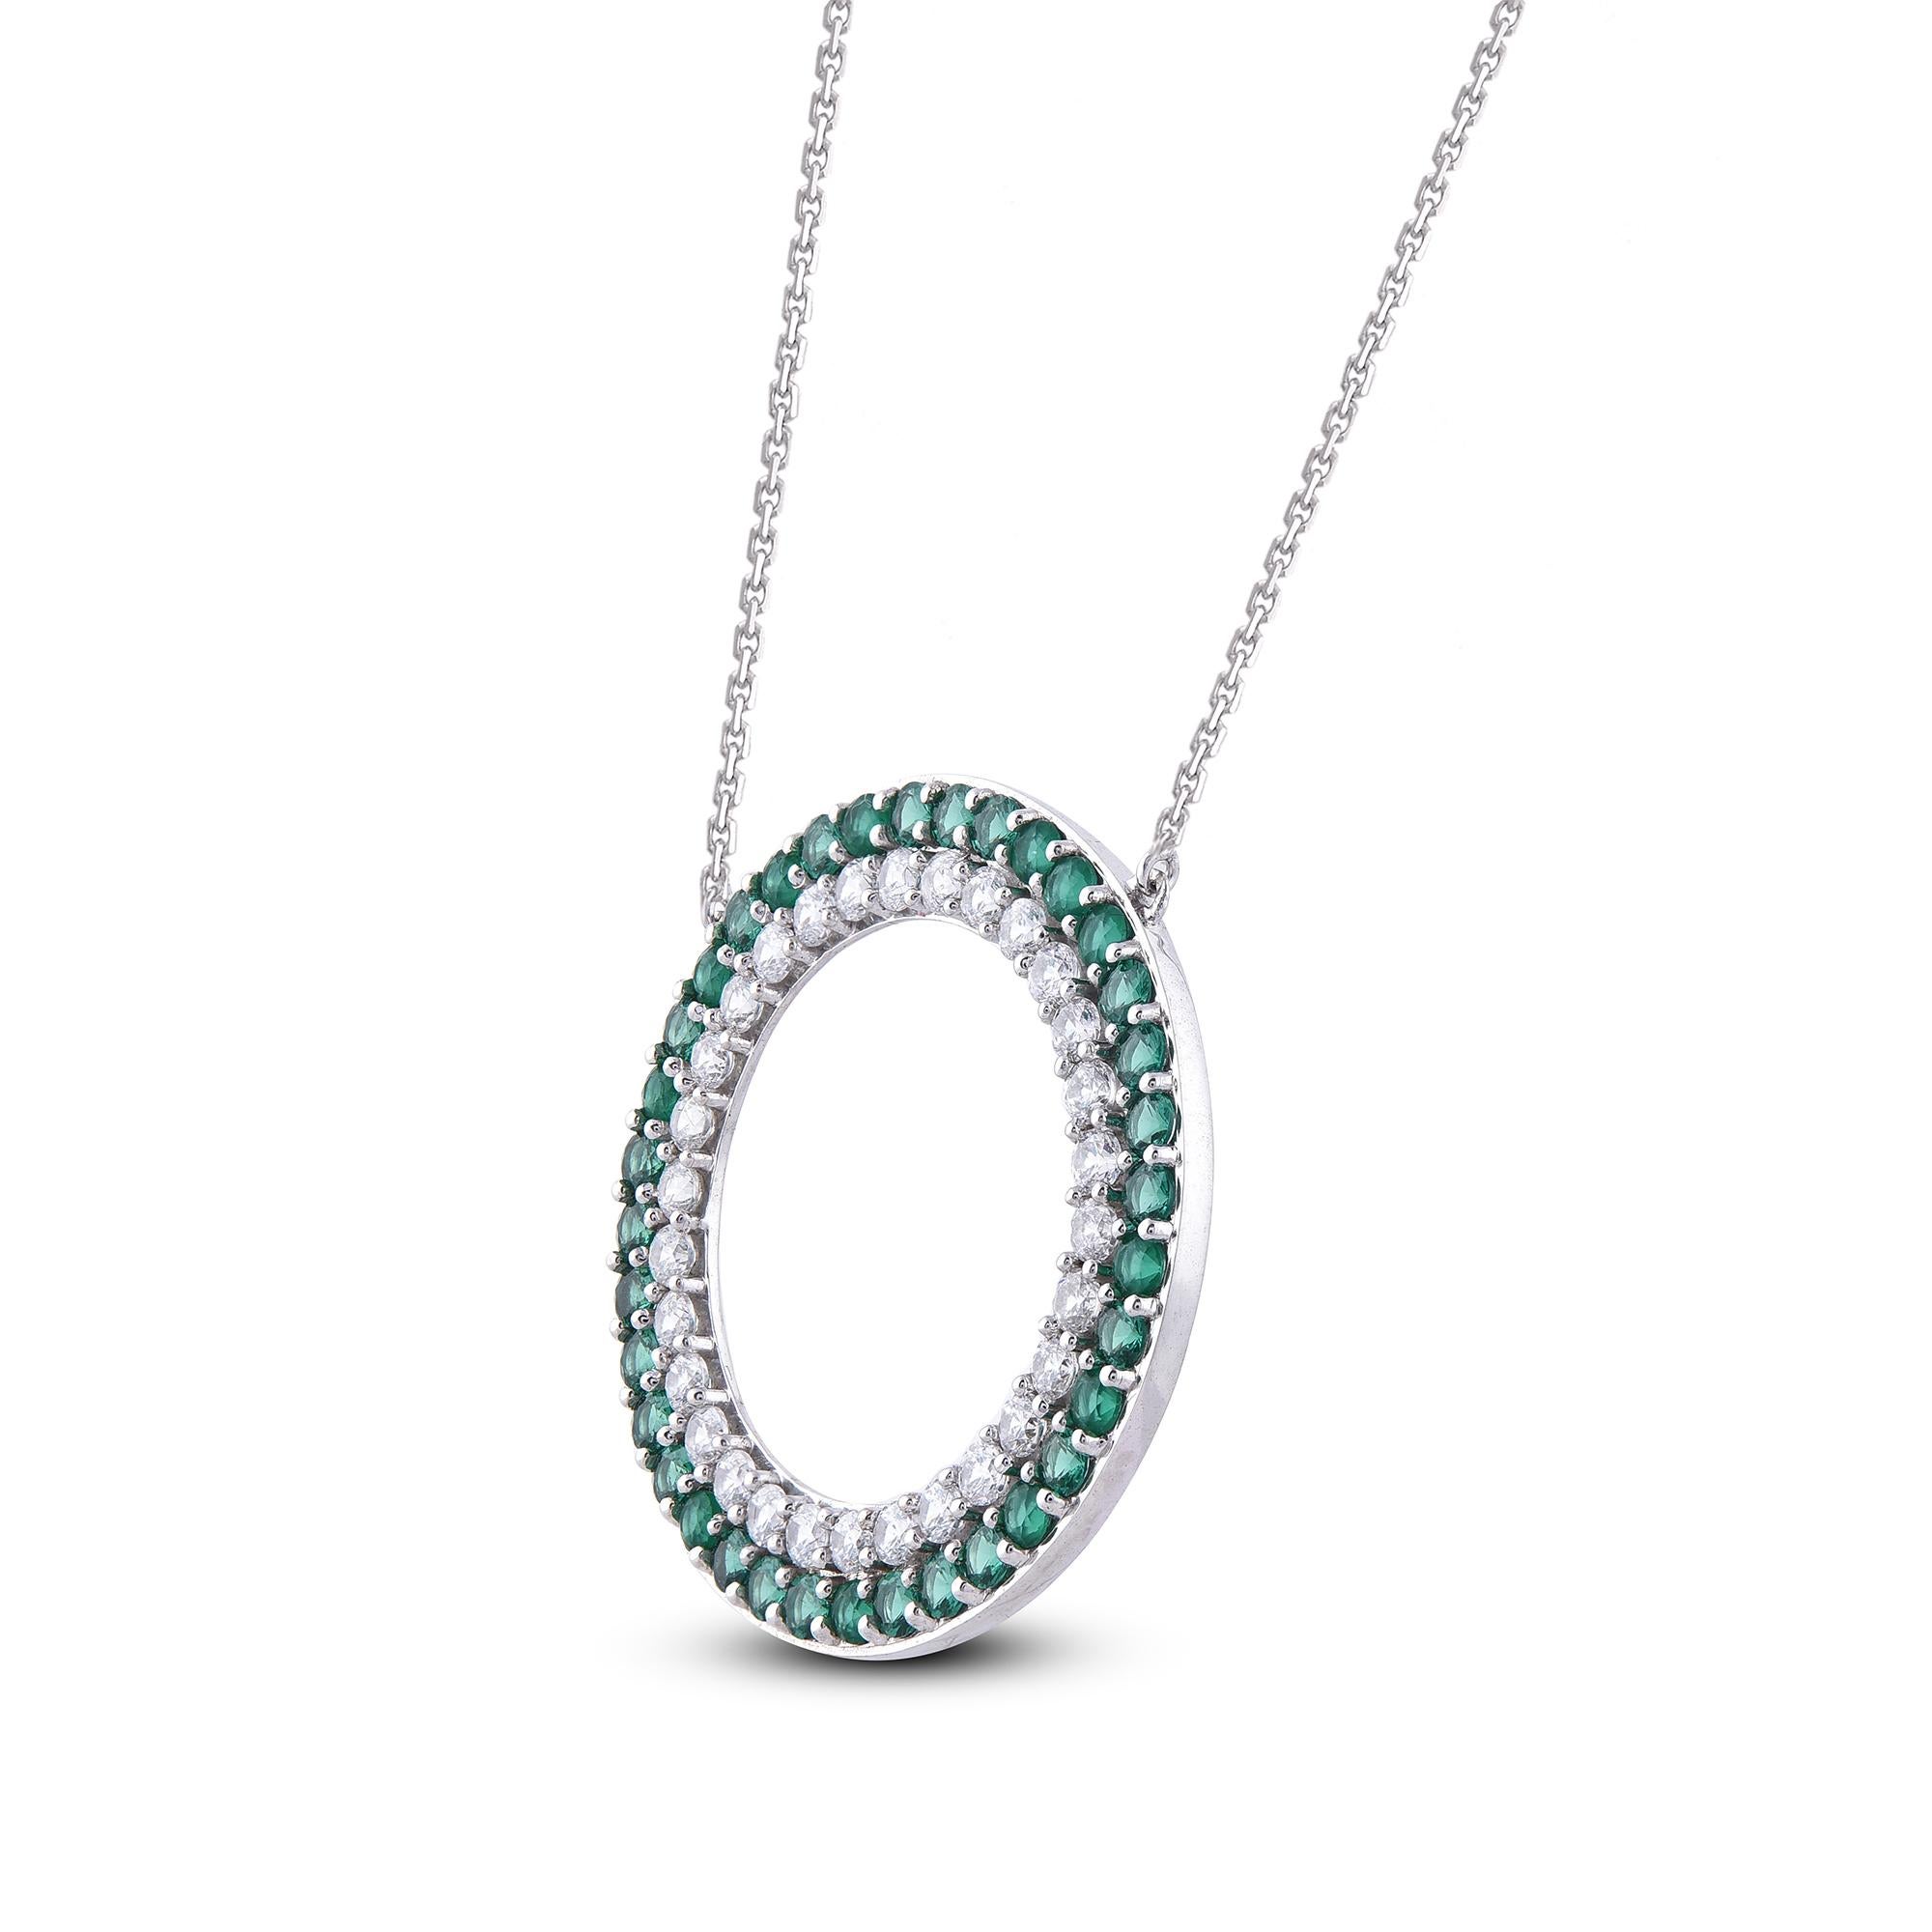 A bright and beautiful choice for any occasion, this sparkling diamond and emerald gemstone pendant gives her a moment to remember. The pendant is crafted from 14 karat white gold and features 30 white diamonds and 36 emerald gemstone, prong set,